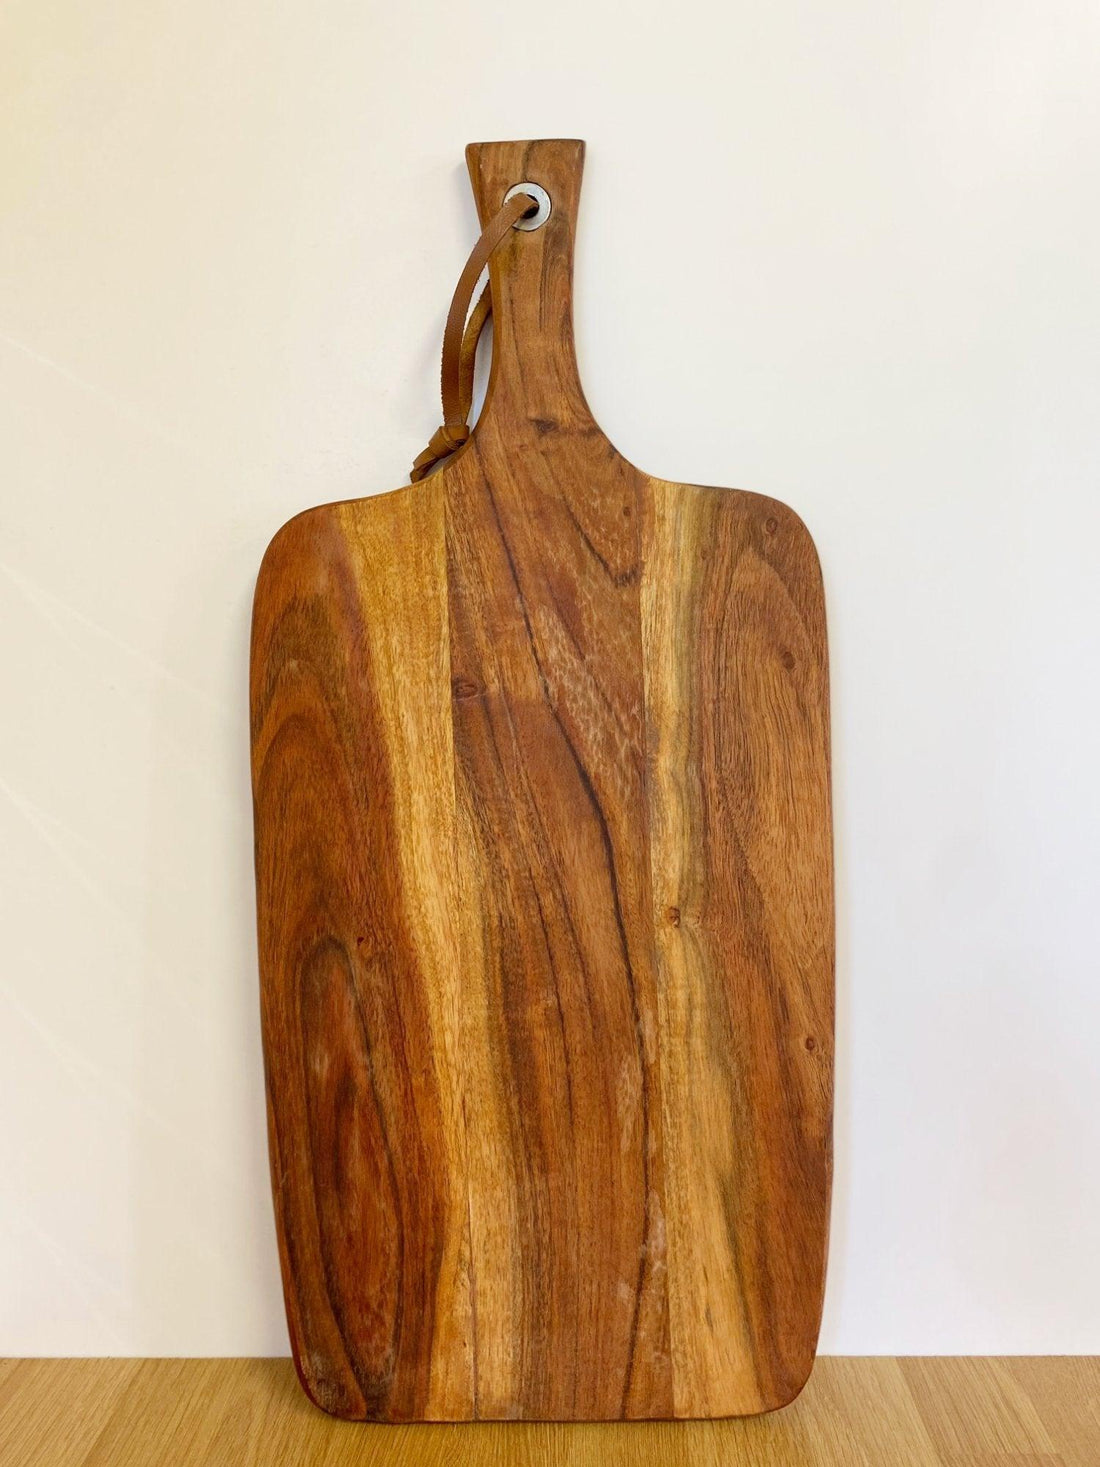 Acacia Wooden Chopping Board Large 55cm - £34.99 - Trays & Chopping Boards 